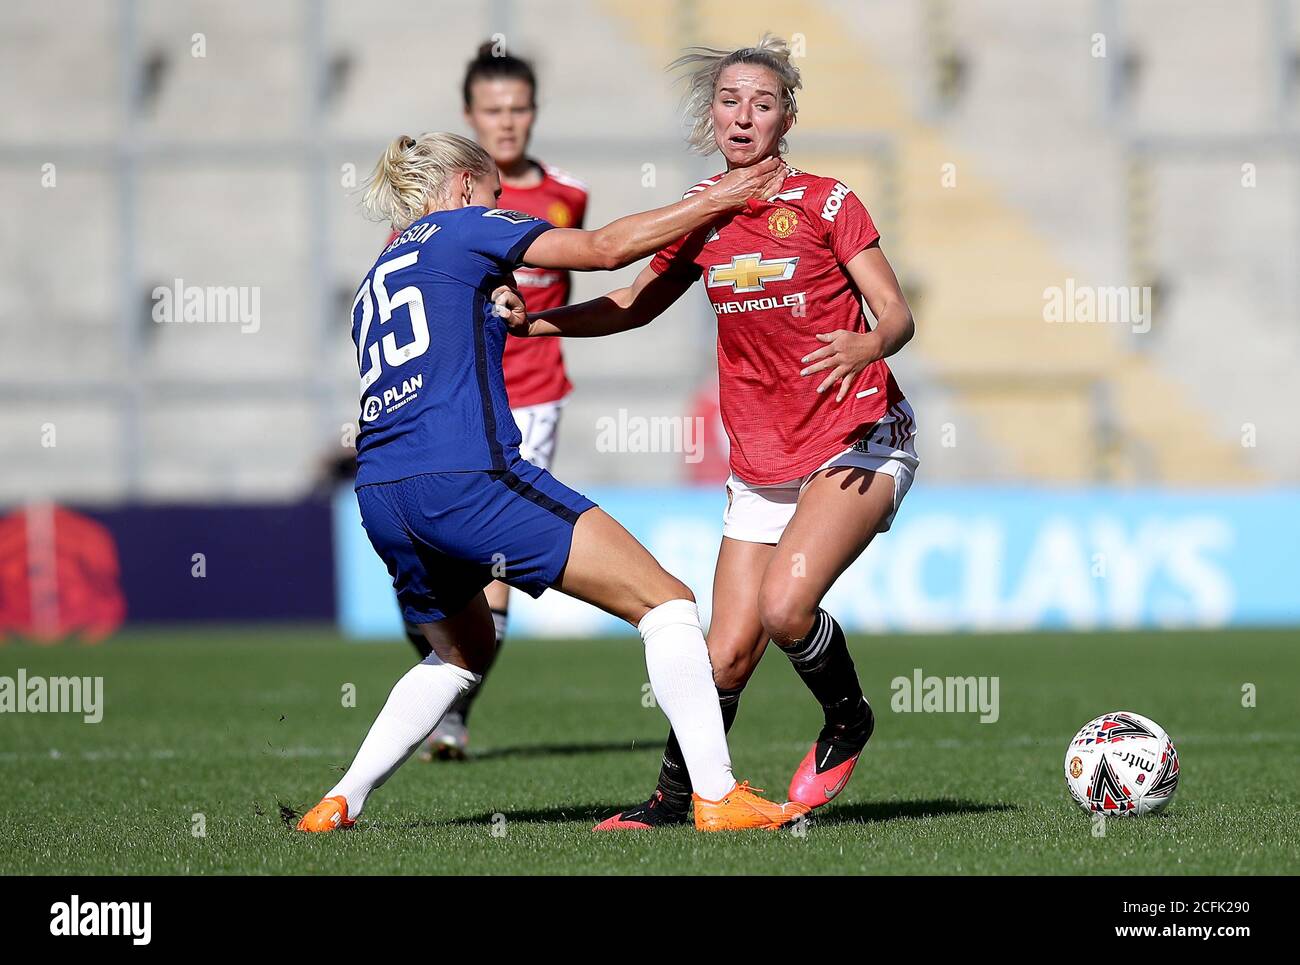 Chelsea's Jonna Andersson (left) grabs Manchester United's Jackie Groenen as they battle for the ball during the FA Women's Super League match at Leigh Sports Village Stadium, Manchester. Stock Photo